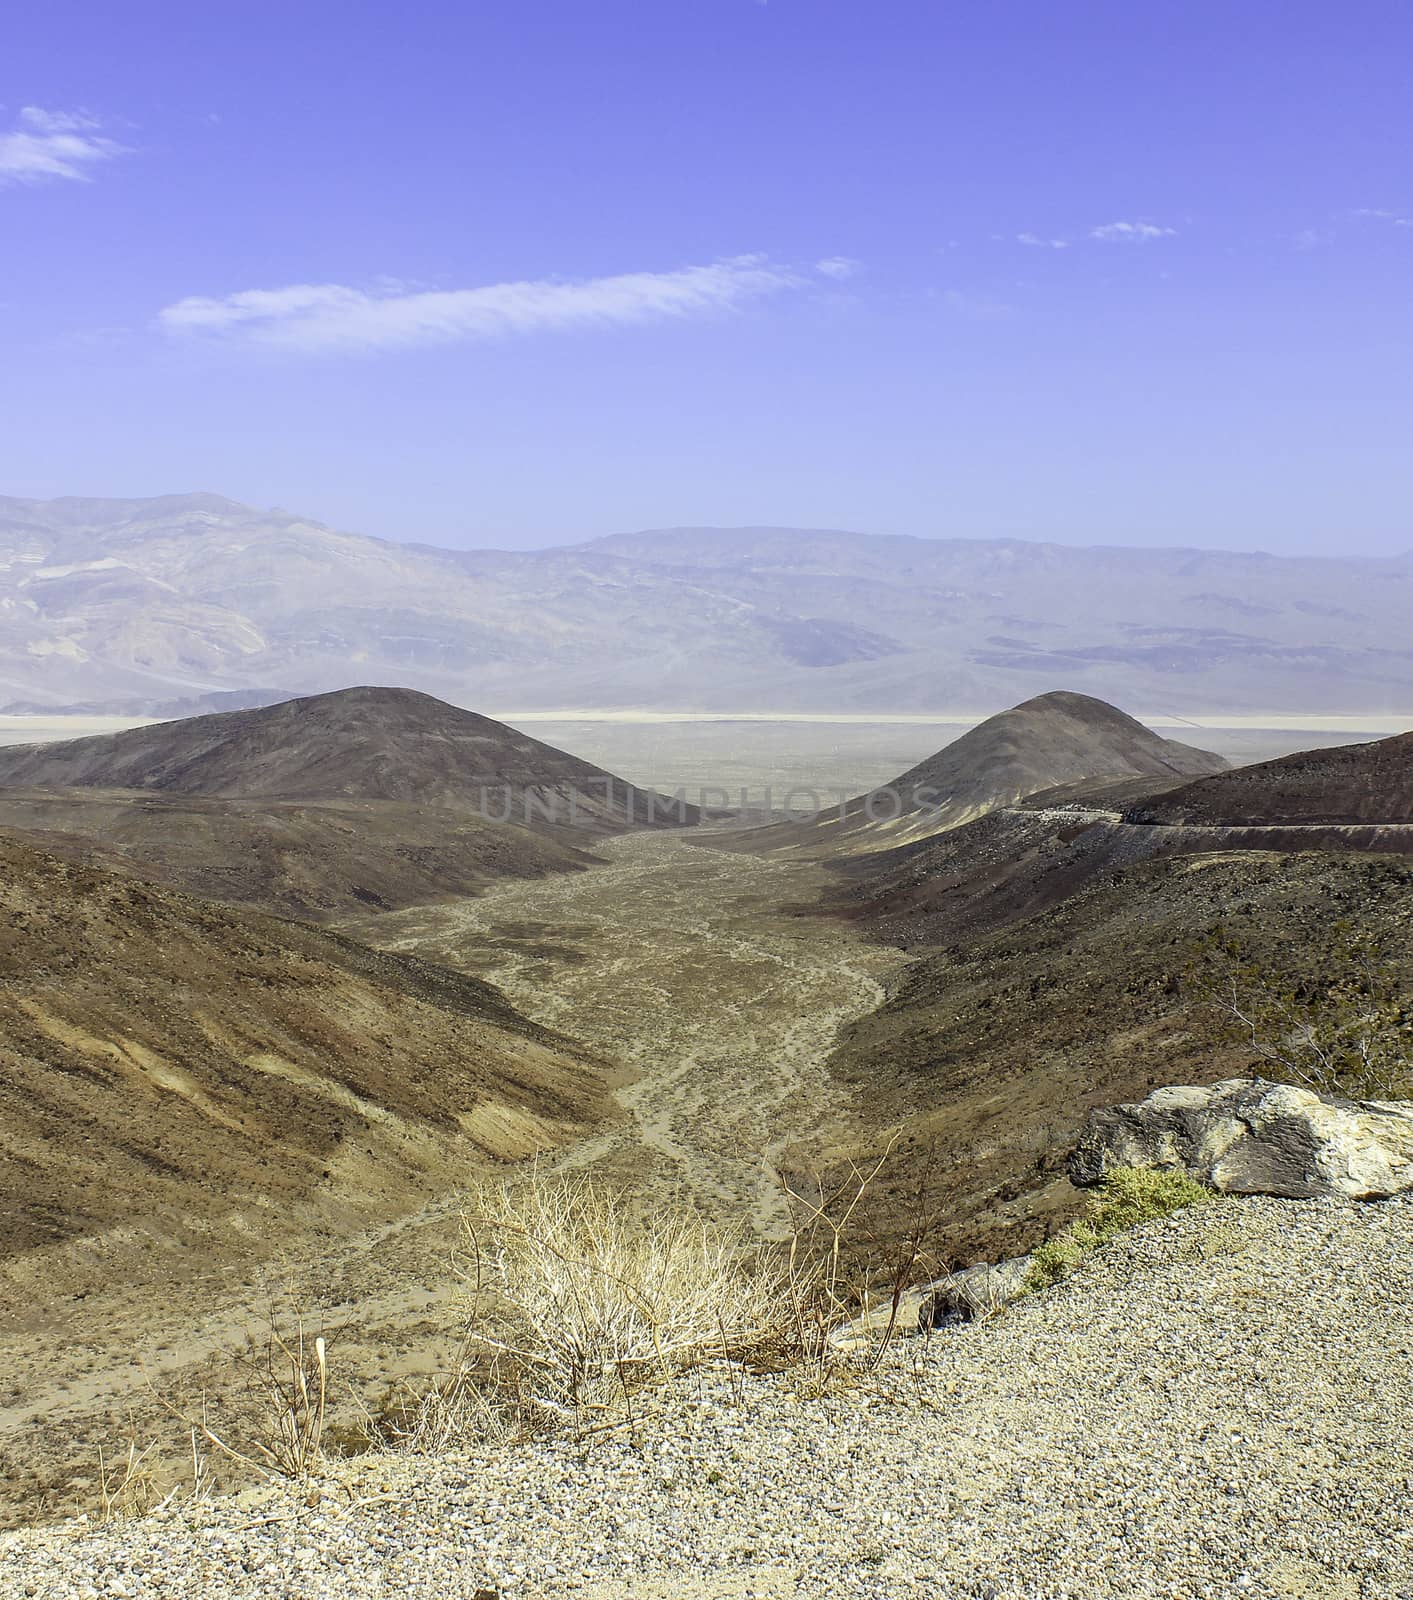 Looking down on an alluvial fan with desert and mountains in the distance